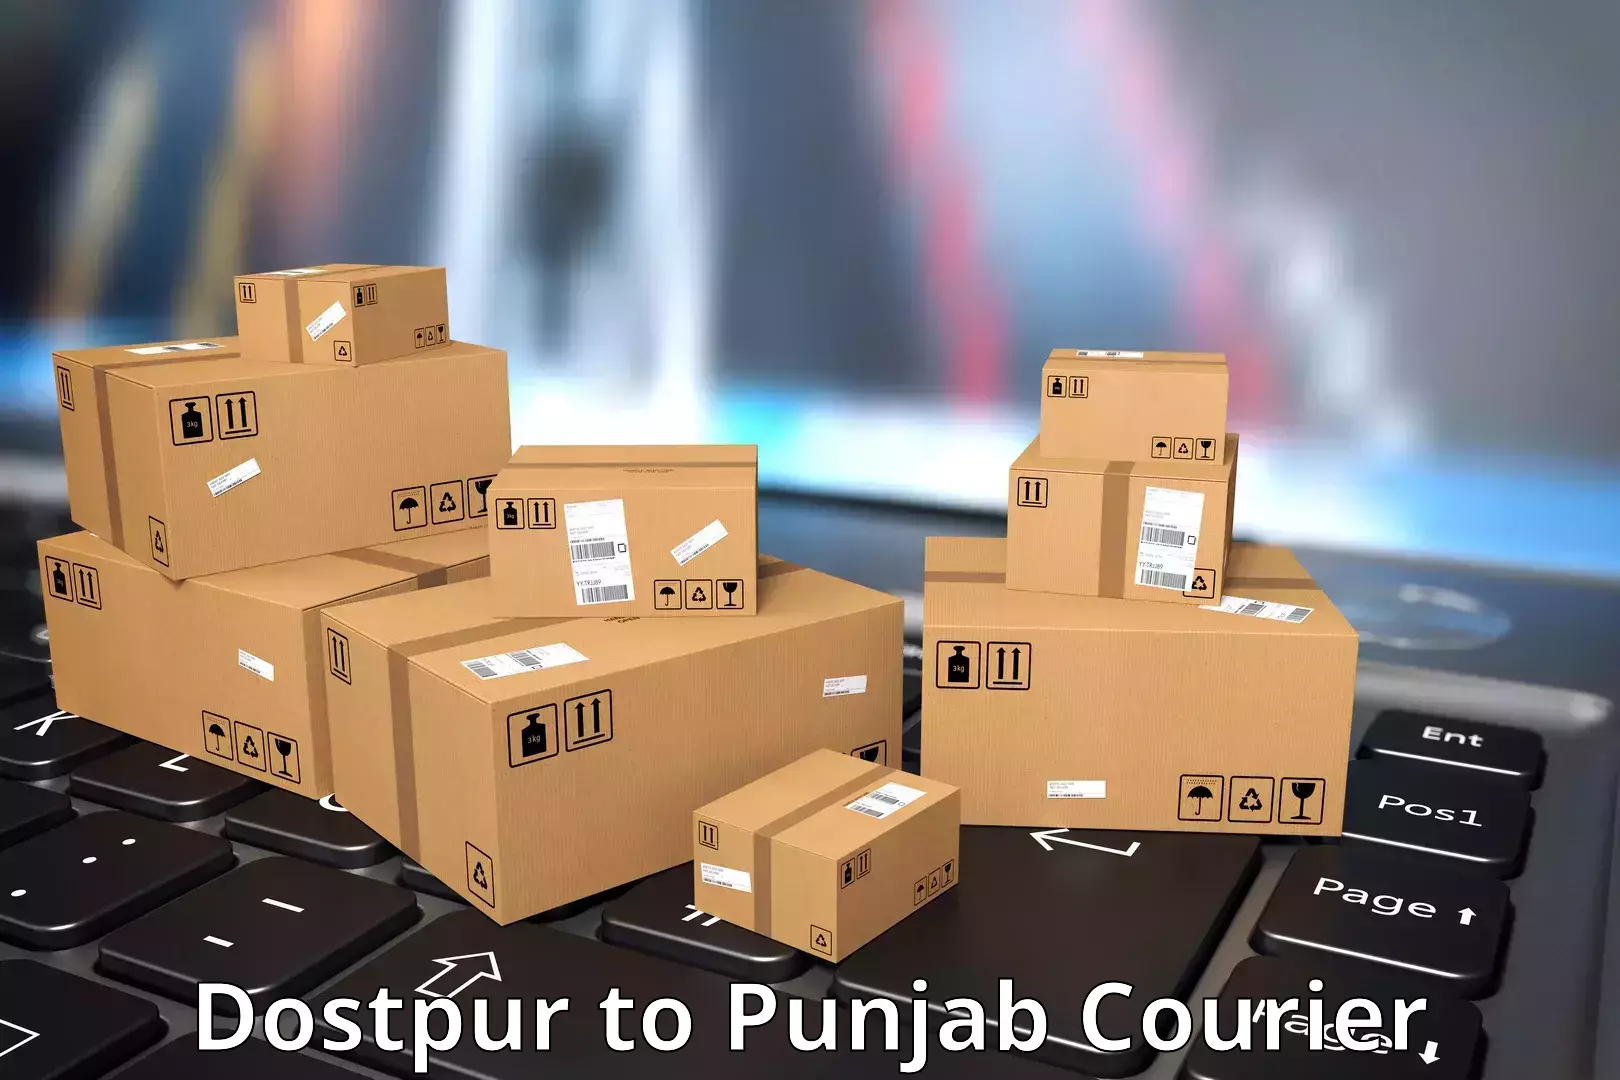 24-hour courier service Dostpur to Barnala